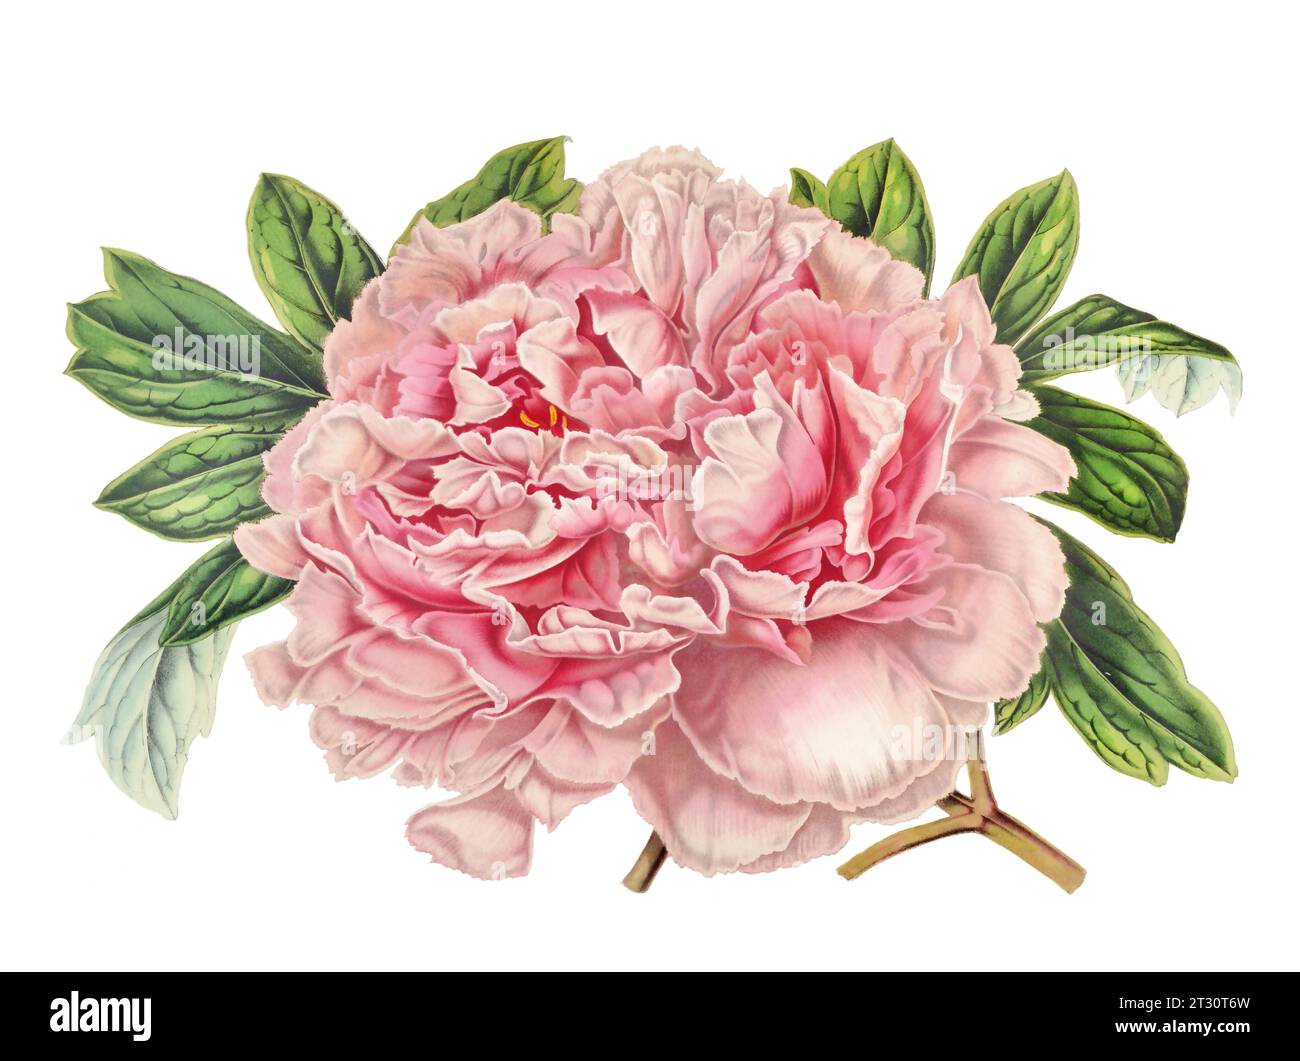 Colorful Peony Flower Illustration: A digital vintage-style flower on a plain white background. Stock Photo